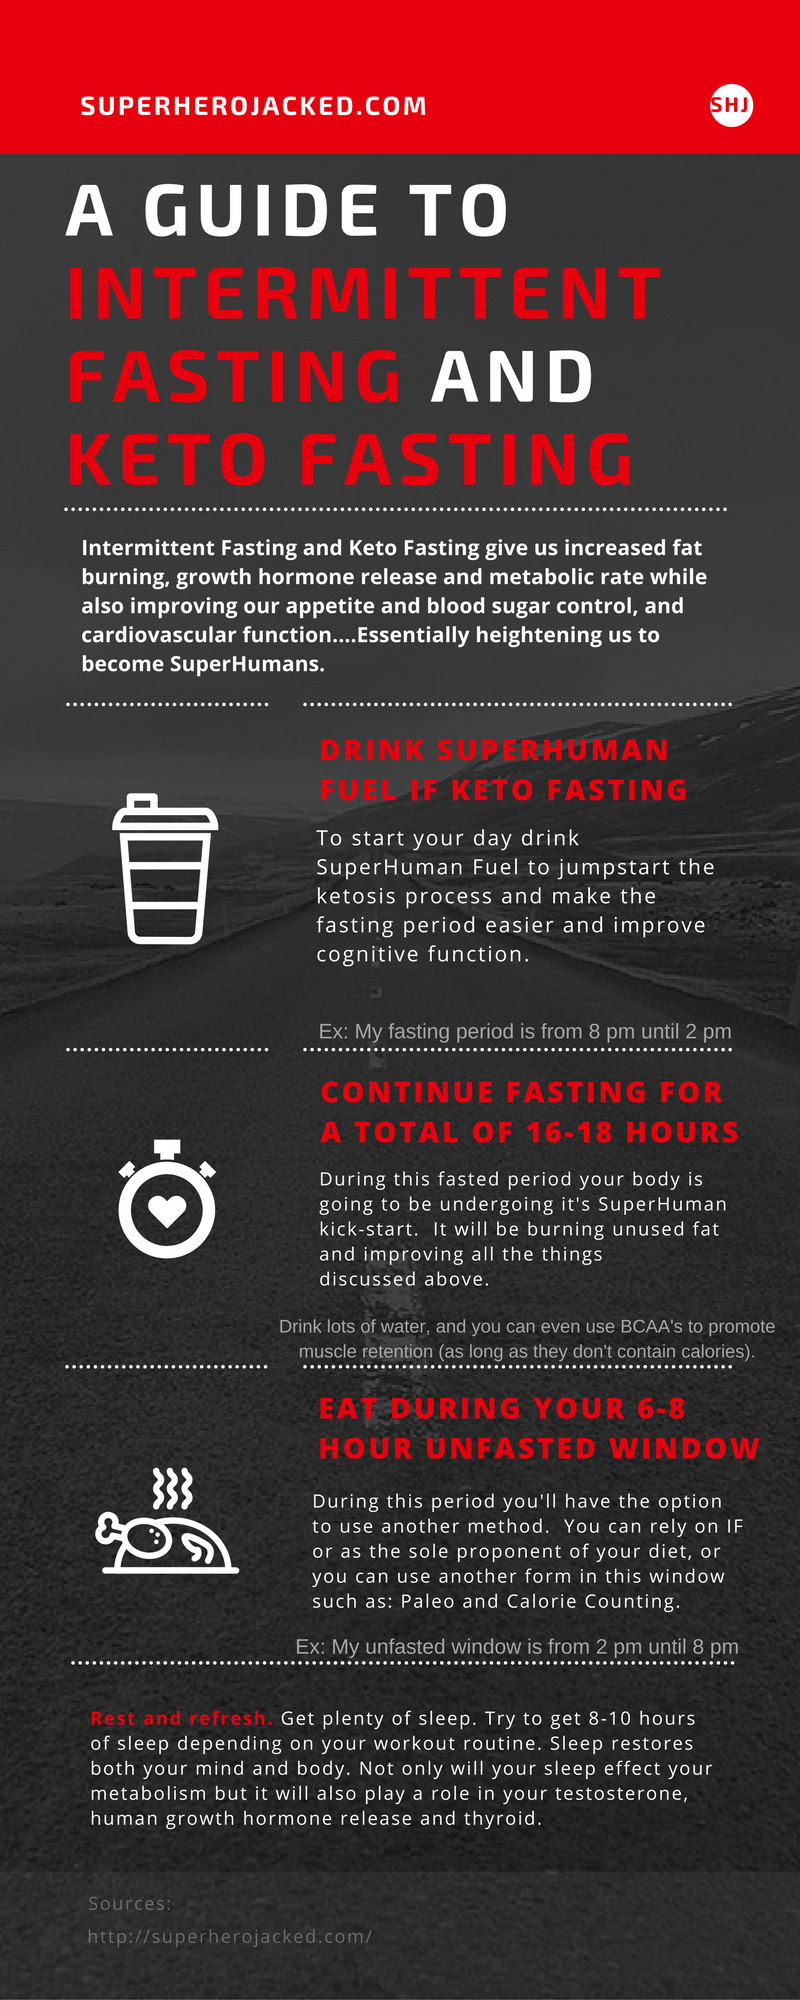 Keto Diet Intermittent Fasting
 A Guide to Intermittent Fasting and Keto Fasting [Infographic]